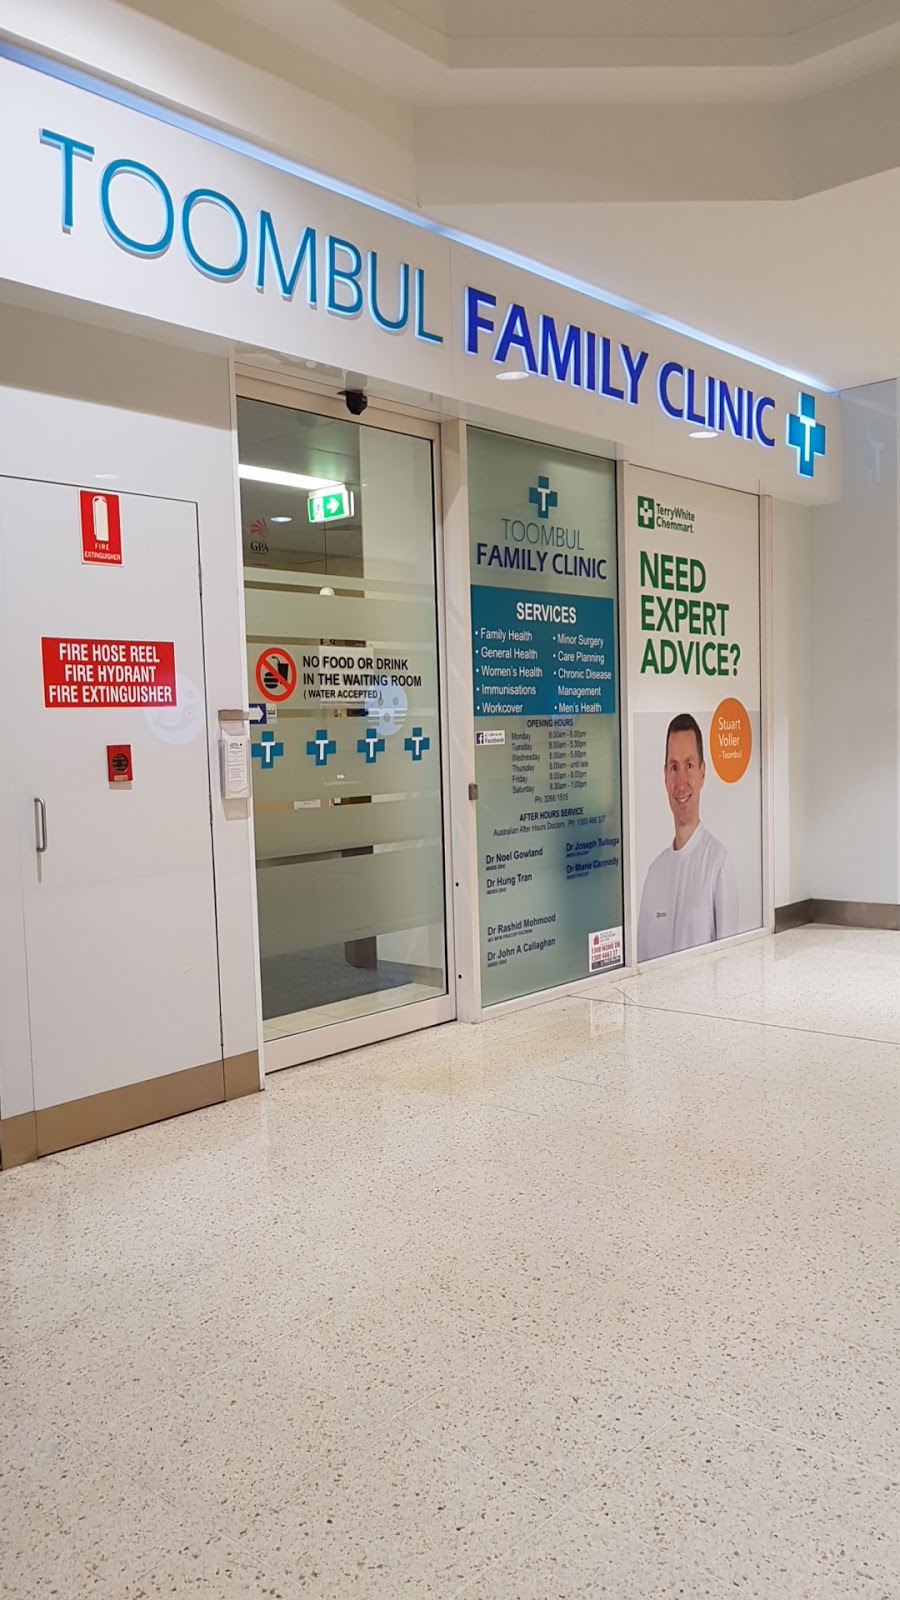 Toombul Family Clinic | Toombul Shopping Town, 1015 Sandgate Rd, Toombul QLD 4012, Australia | Phone: (07) 3266 1515